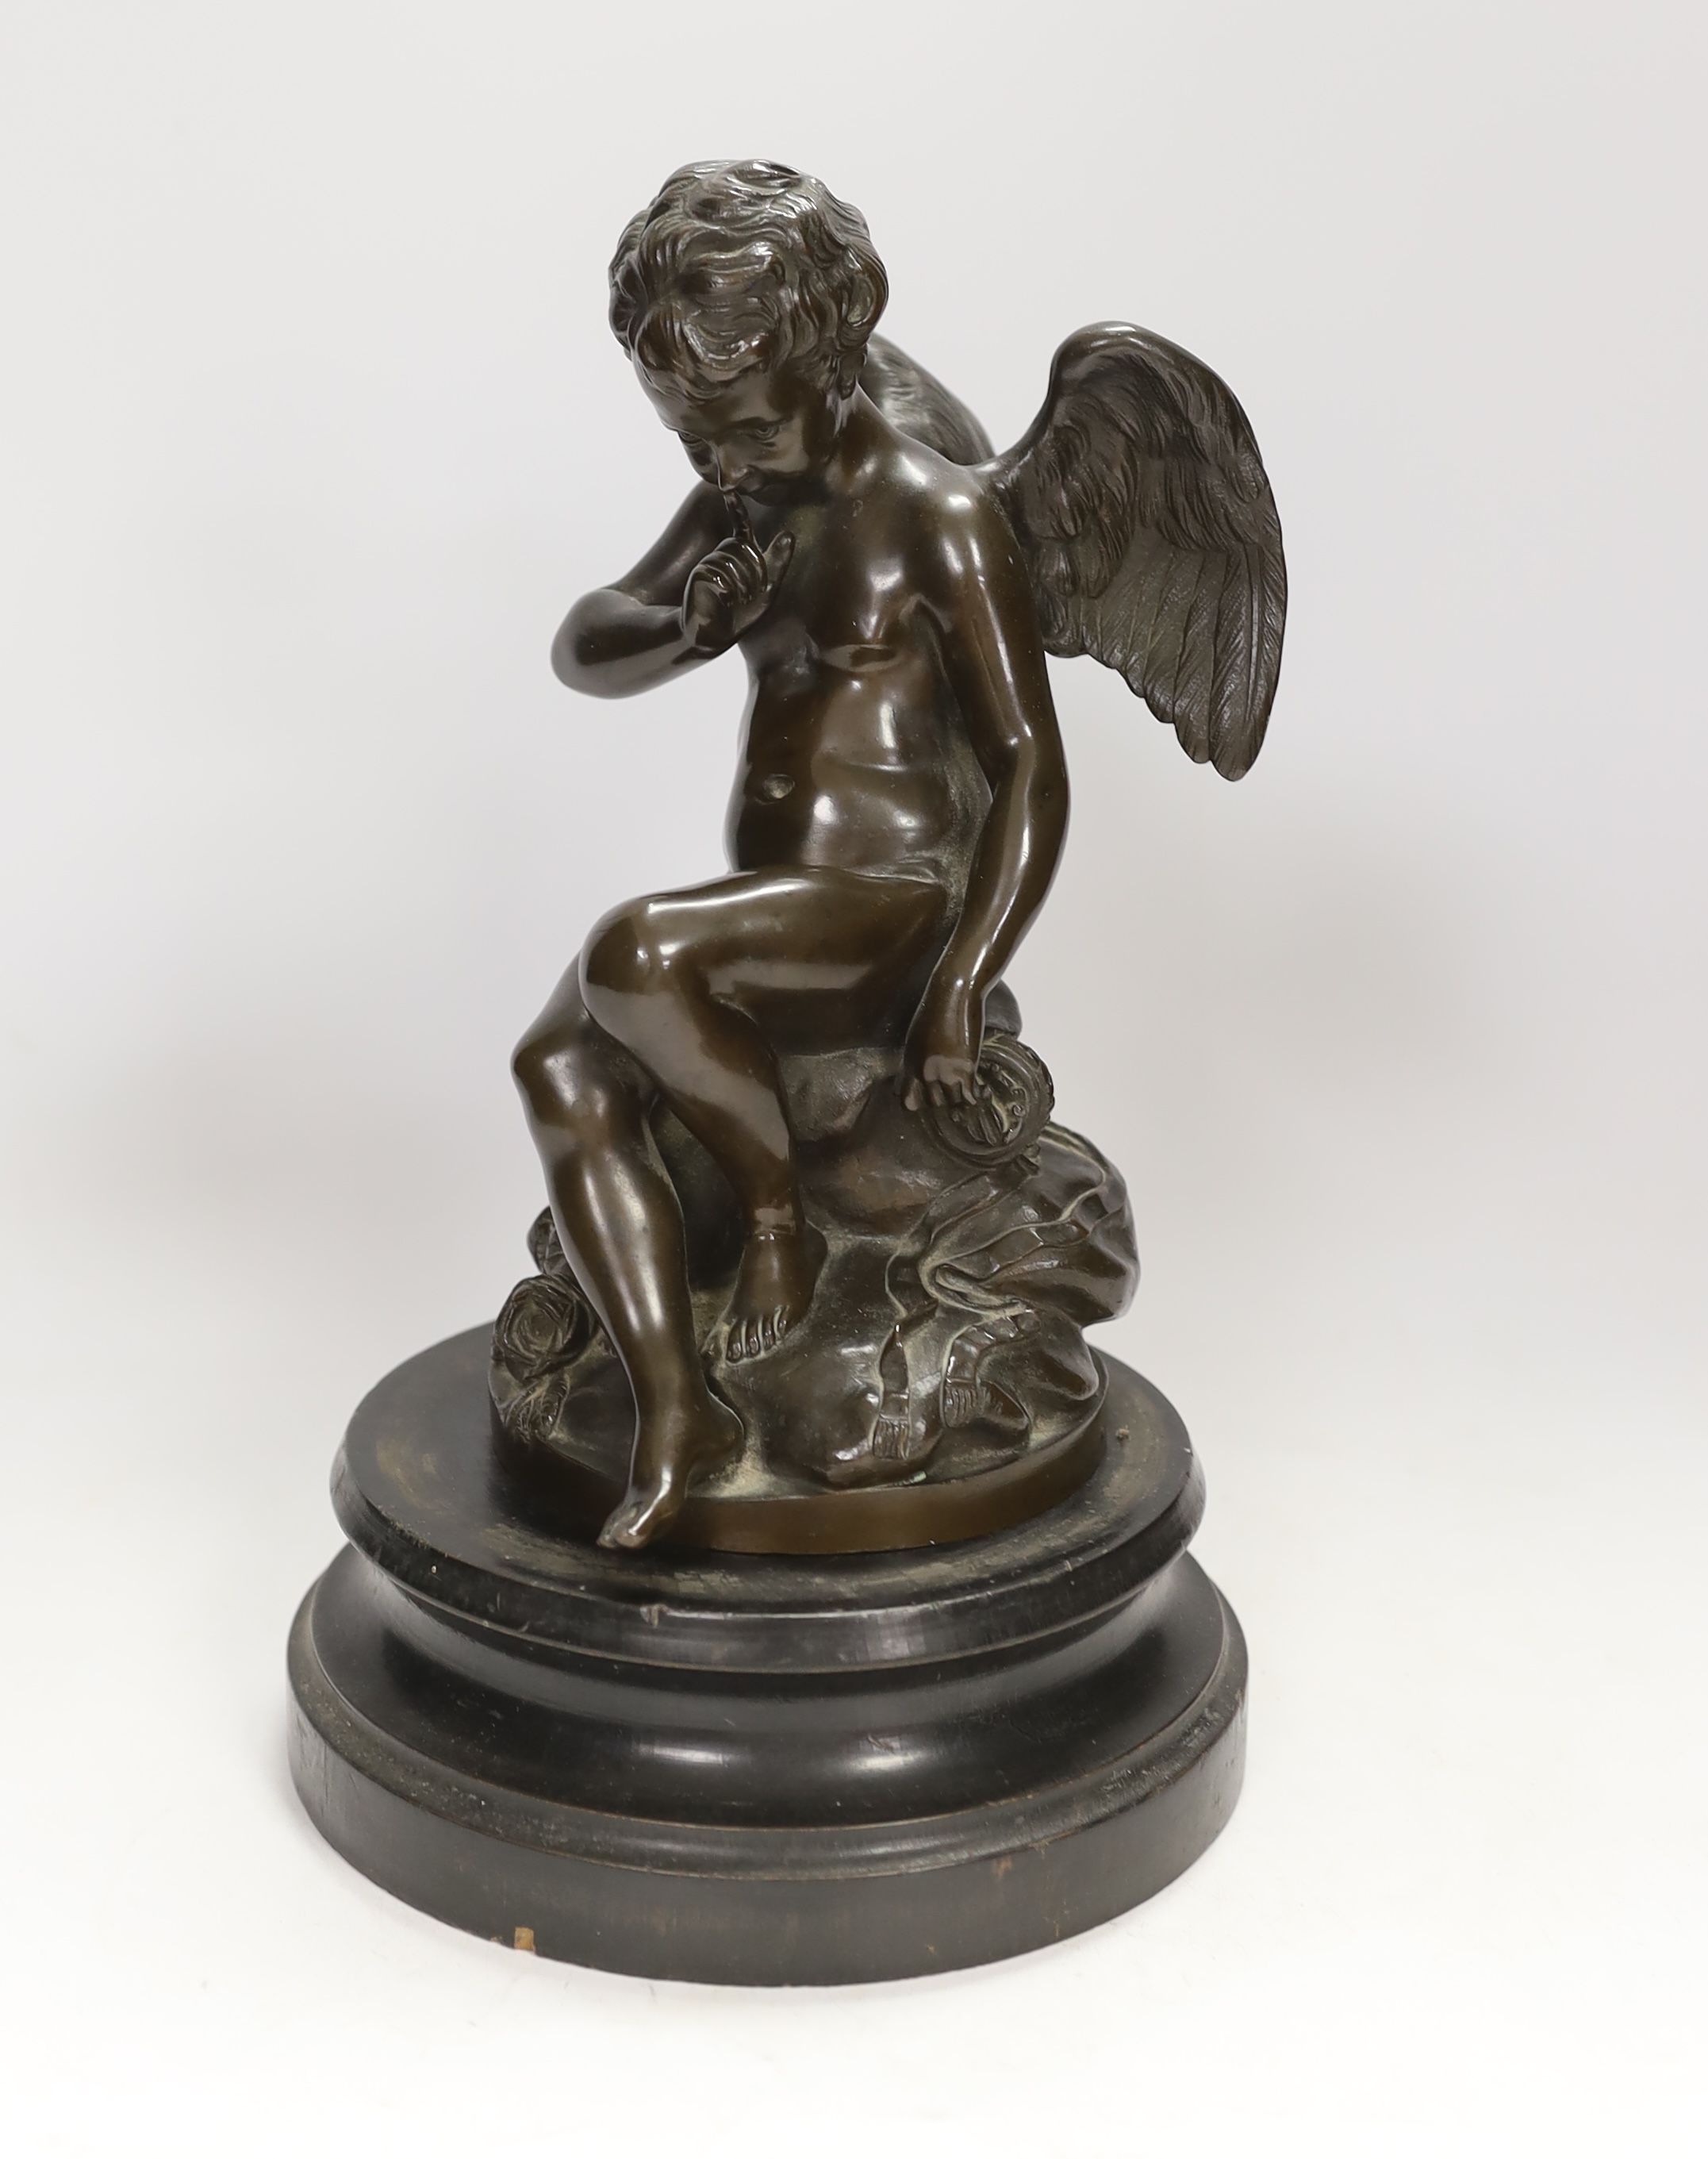 After Etienne Maurice Falconet (French, 1716-1791), a cast bronze of Cupid ‘L’Amour Menacant, on hardwood stand, 28cm total